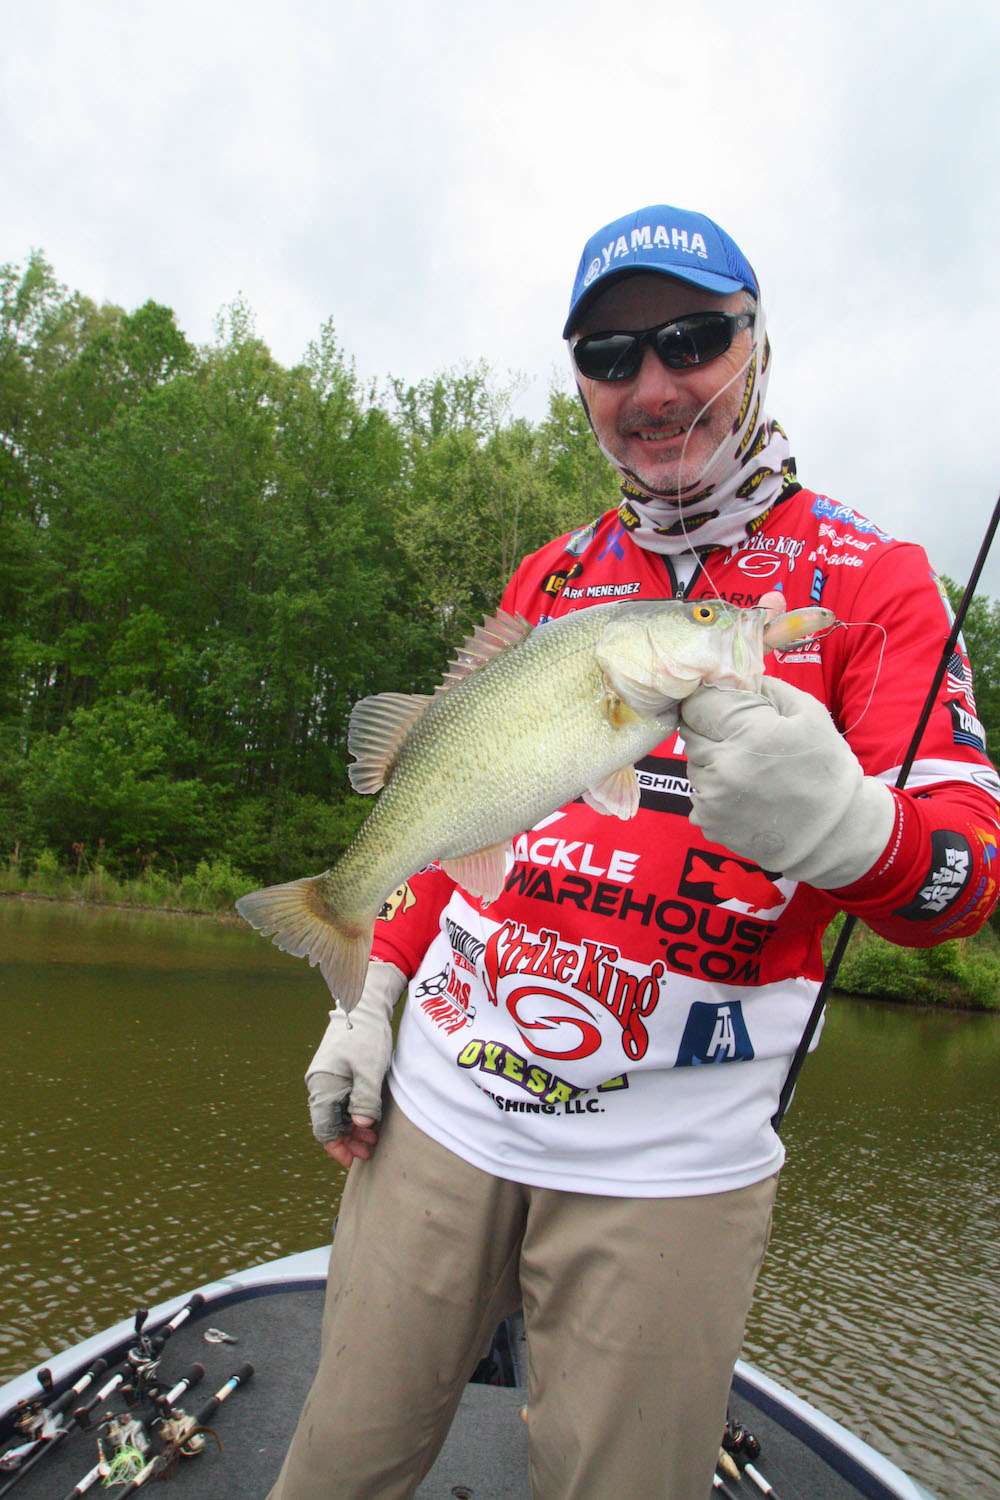 <b>11:02 a.m.</b> Menendez bags a Â­2-7 off a nearby mud flat on the swimbait. <br>
<b>11:04 a.m.</b> He catches a Â­10-inch bass on the trick worm. âThatâs the first nonkeeper Iâve caught all day.â <br>
<b>11:16 a.m.</b> Menendezâs 20th keeper, a Â­2-5 largemouth, eats his floating worm near a stickup. <br>
<b>11:22 a.m.</b> Menendez moves into a C-shaped pocket and spots bluegill beds near the bank. âBluegill spawn a little later than bass. The water here is a couple degrees warmer than uplake, so there may not be as many bedding bass.â
<br><br>
<b>2 HOURS LEFT</B><BR>
<b>11:30 a.m.</b> Light rain is falling as a good fish swirls on Menendezâs floating worm, then swims away. He pulls out a spinning rod and rigs another Perfect Plastic worm, this one in the oxblood pattern, wacky style (hook through the middle) and casts it to the swirl. The bass, a Â­3-pounder, is circling the area. âThatâs a male trying to herd its fry.â <br>
<b>11:47 a.m.</b> No luck with the fry herder, so Menendez continues down the bank with the floating worm. Another Â­3-pounder darts at the worm, then disappears. Menendez immediately tries the Shadalicious but hauls water. <br>
<b>11:52 a.m.</b> Menendez tries a shad-color surface popper near a laydown tree. <br>
<b>11:59 a.m.</b> He casts the trick worm to a boathouse. No takers here. <br>
<b>12:17 p.m.</b> Menendez rockets back uplake to the flat he fished earlier. âI saw more beds up here, and the water is clearer. The temperature has dropped with this incoming front; that could slow things down.â <br>
<b>12:23 p.m.</b> Menendez runs the Shadalicious past the bed where he foul-hooked the Â­6-pounder. <br>
<b>12:26 p.m.</b> Menendez repositions his boat to get a better view of the bed. âHoly crap, there are three fish on that bed, all 2- to 3-pounders. I donât see the Â­6-pounder, though.â He pitches the twin-tail grub repeatedly to the nest. âThereâs a low branch sticking straight over the nest; Iâm having to wedge the lure under it to hit the bed. Iâve been known to snip off limbs with hedge clippers that were in my way when sight fishing in tournaments.â
